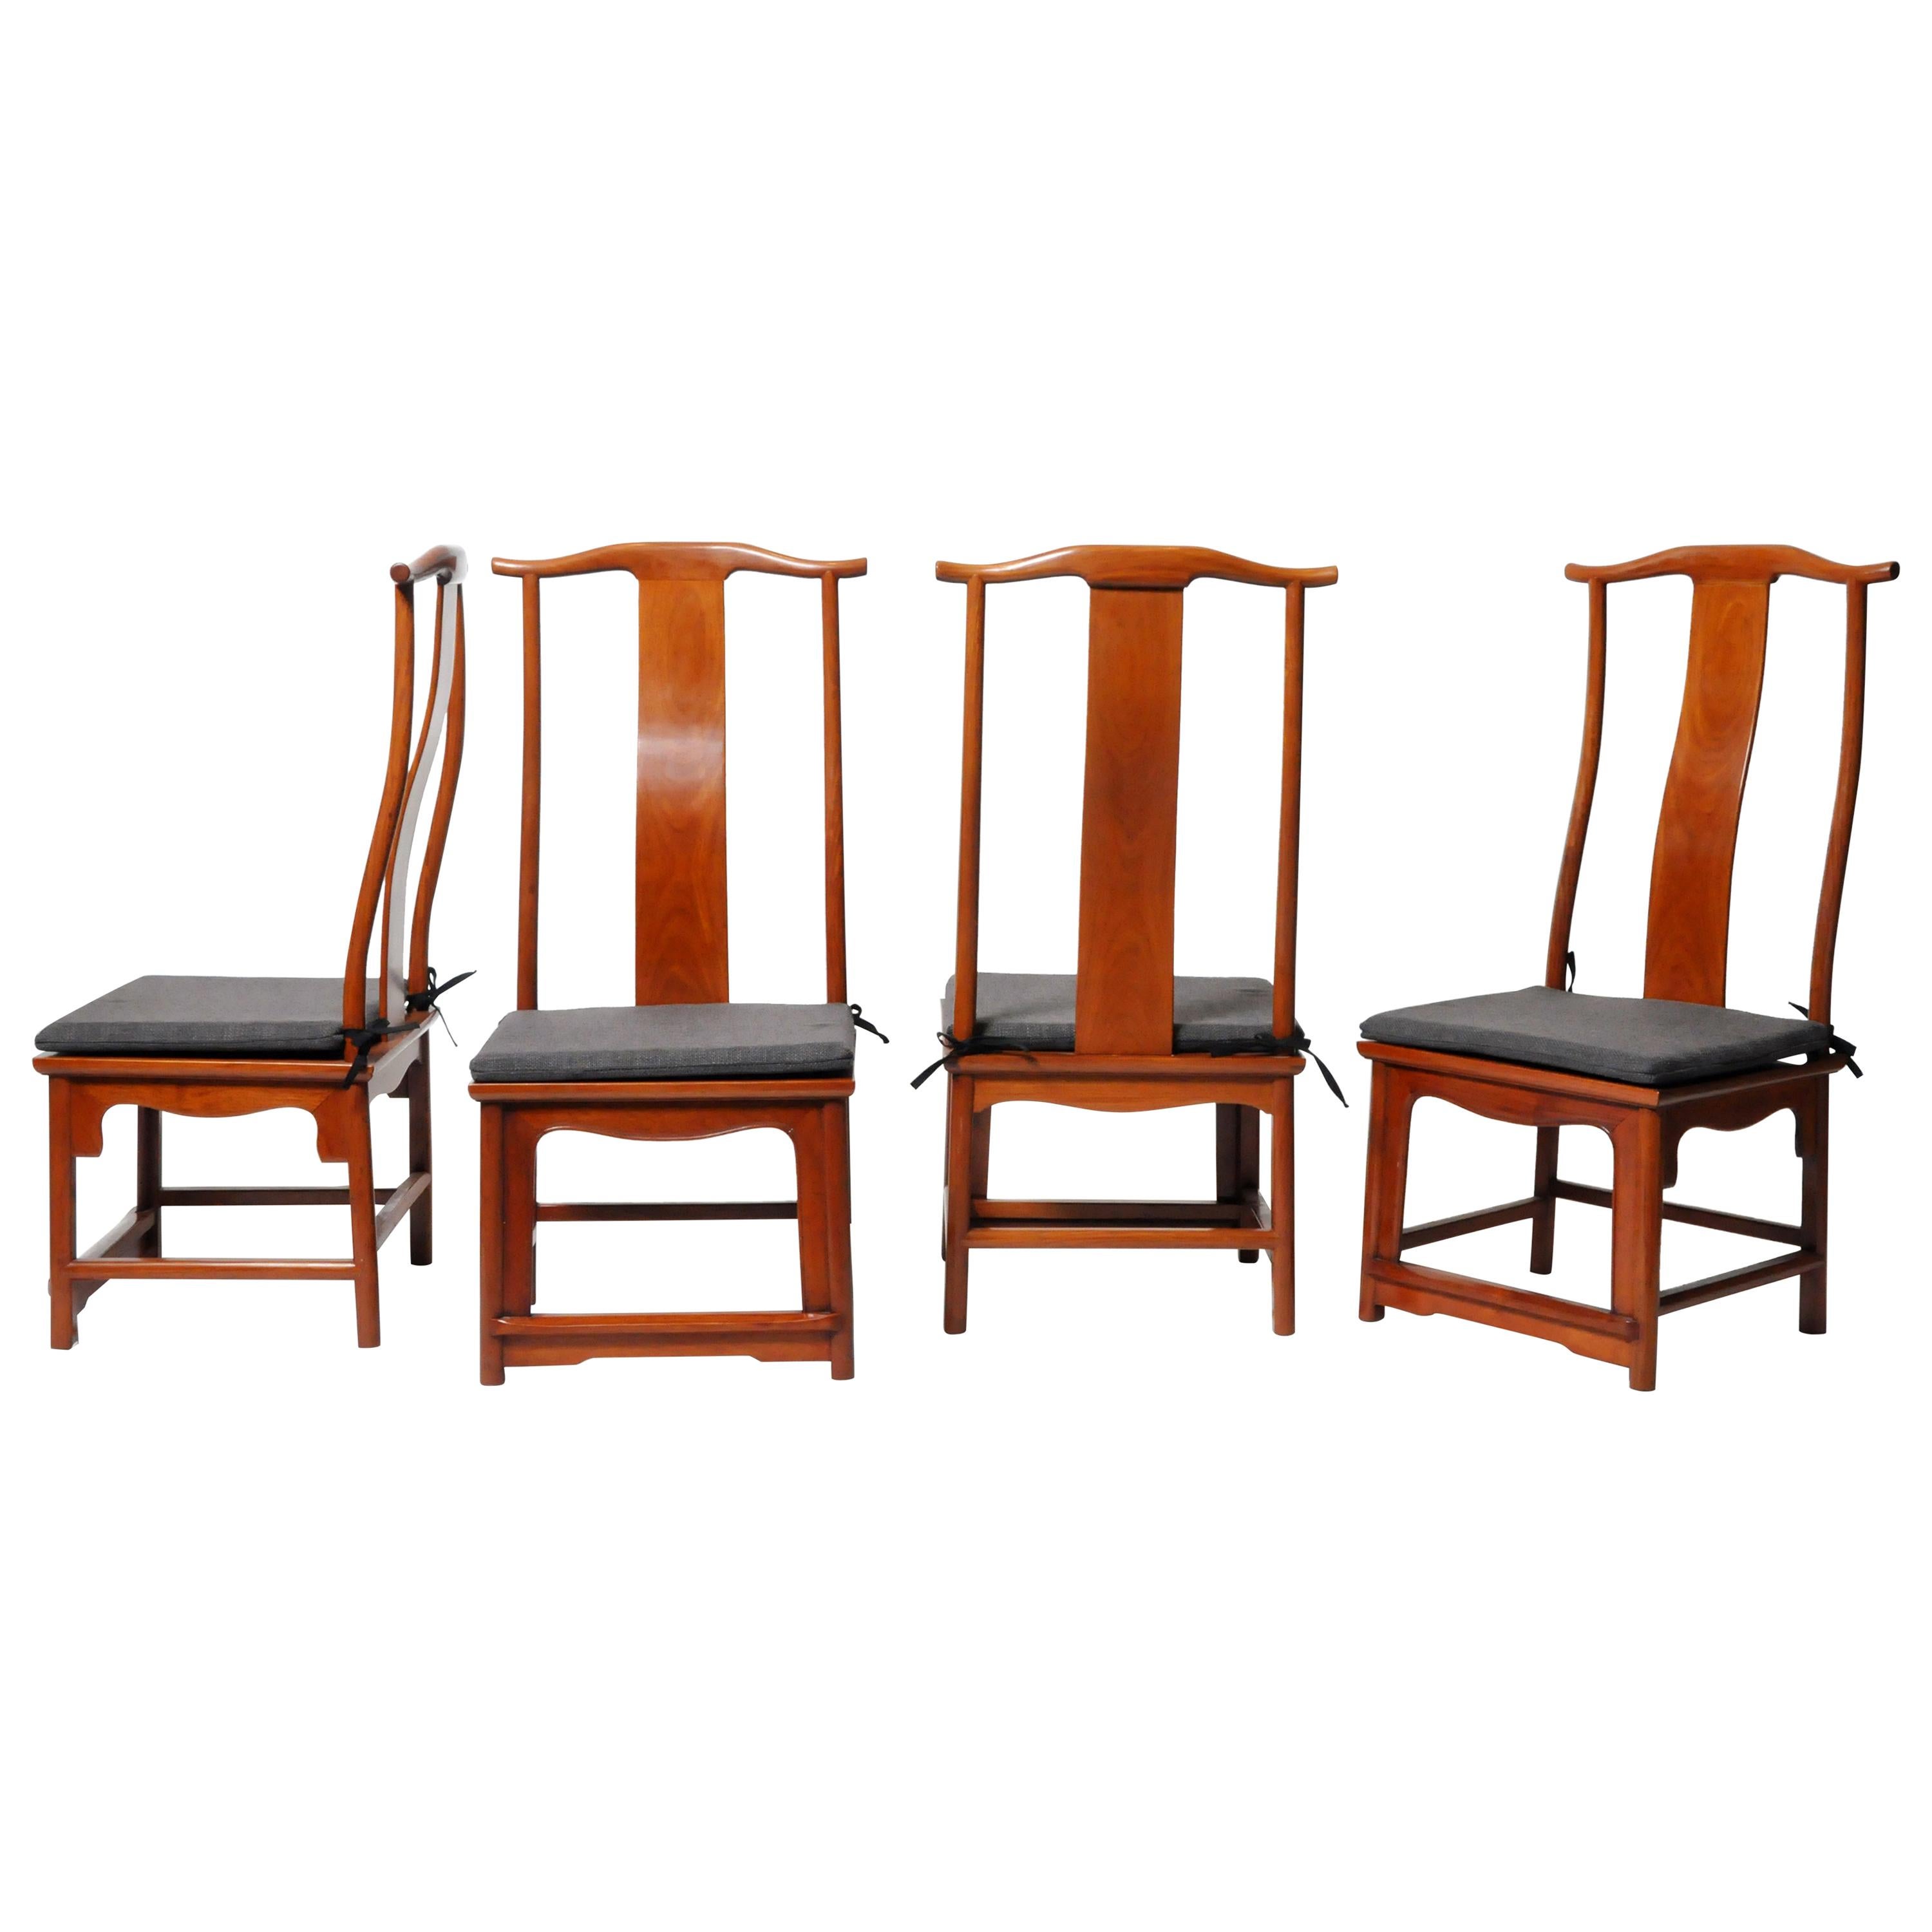 A Set of Four Chinese Dining Chairs